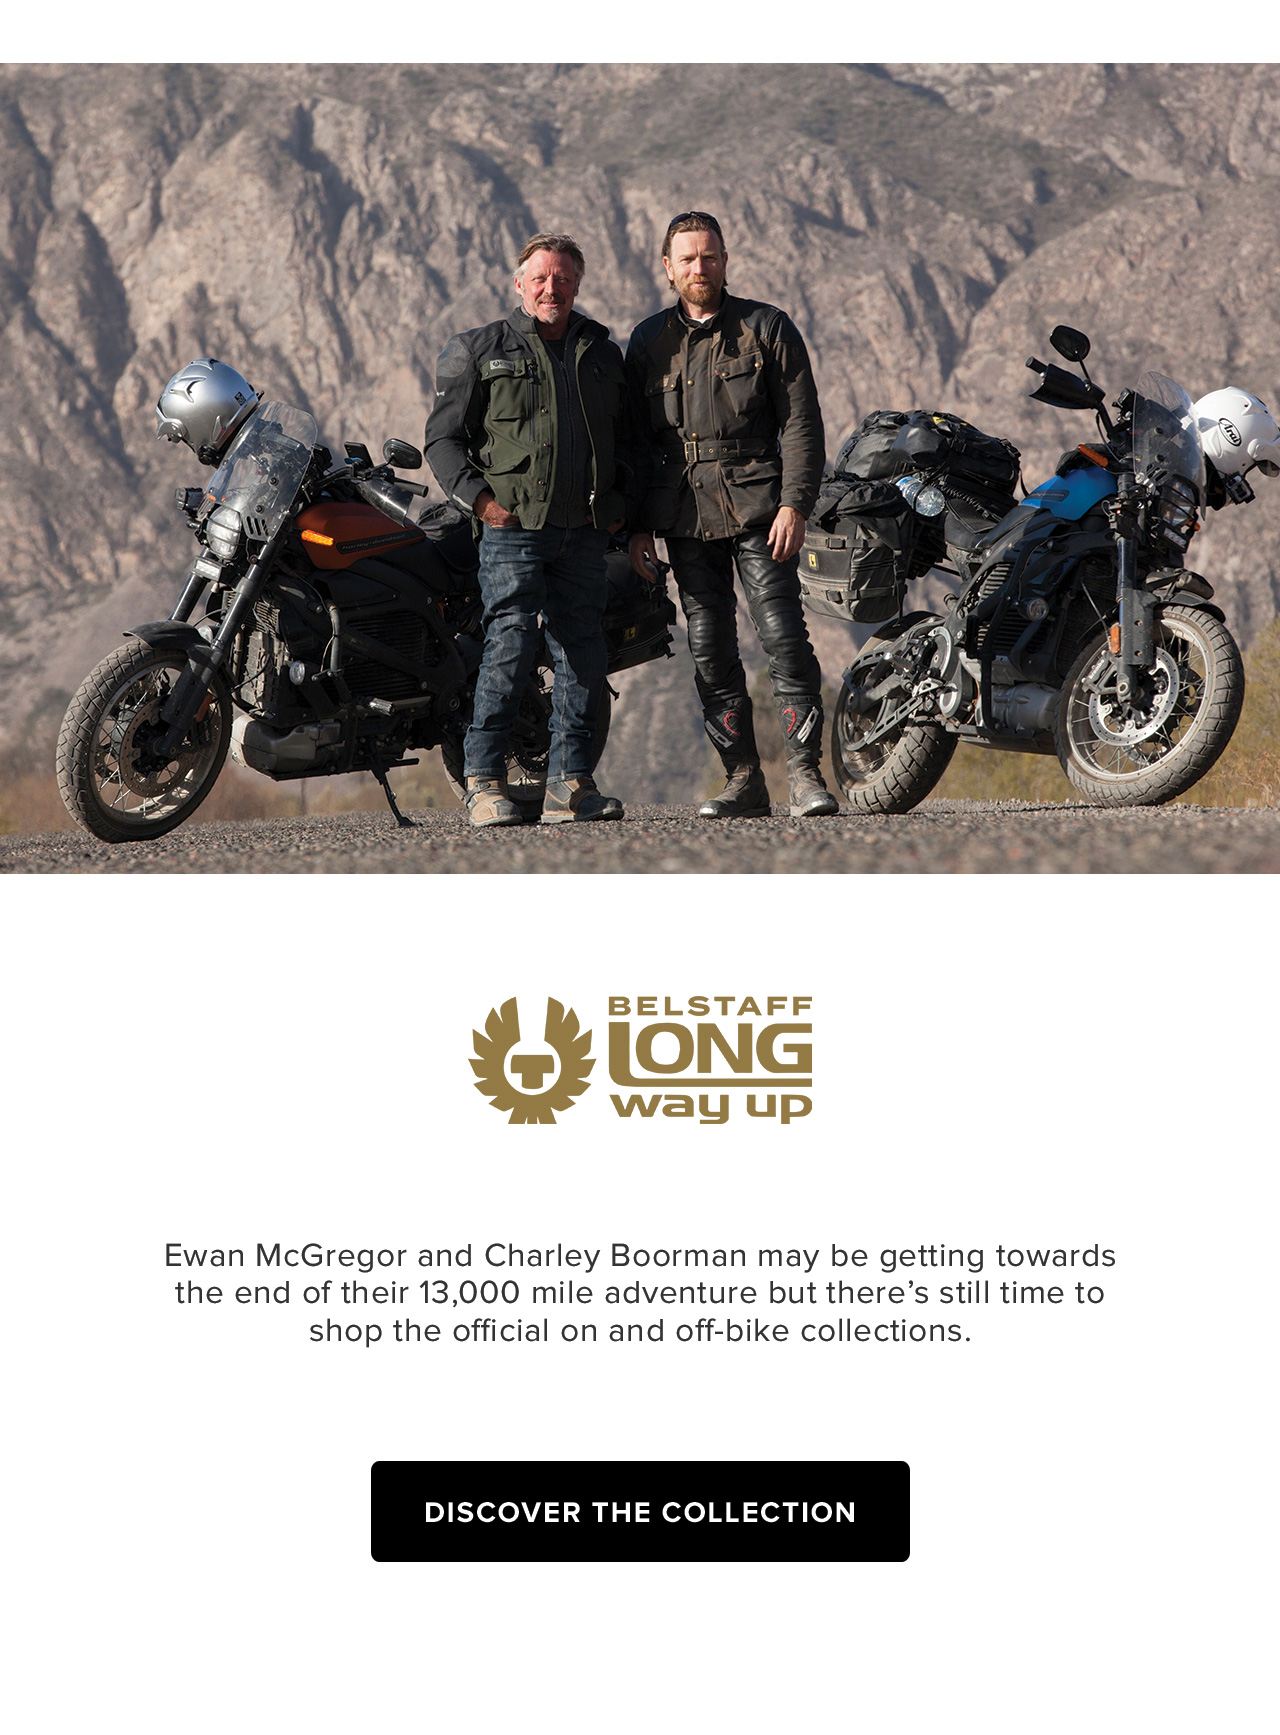 Ewan McGregor and Charley Boorman may be getting towards the end of their 13,000 mile adventure but there's still time to shop the official on and off bike collections.